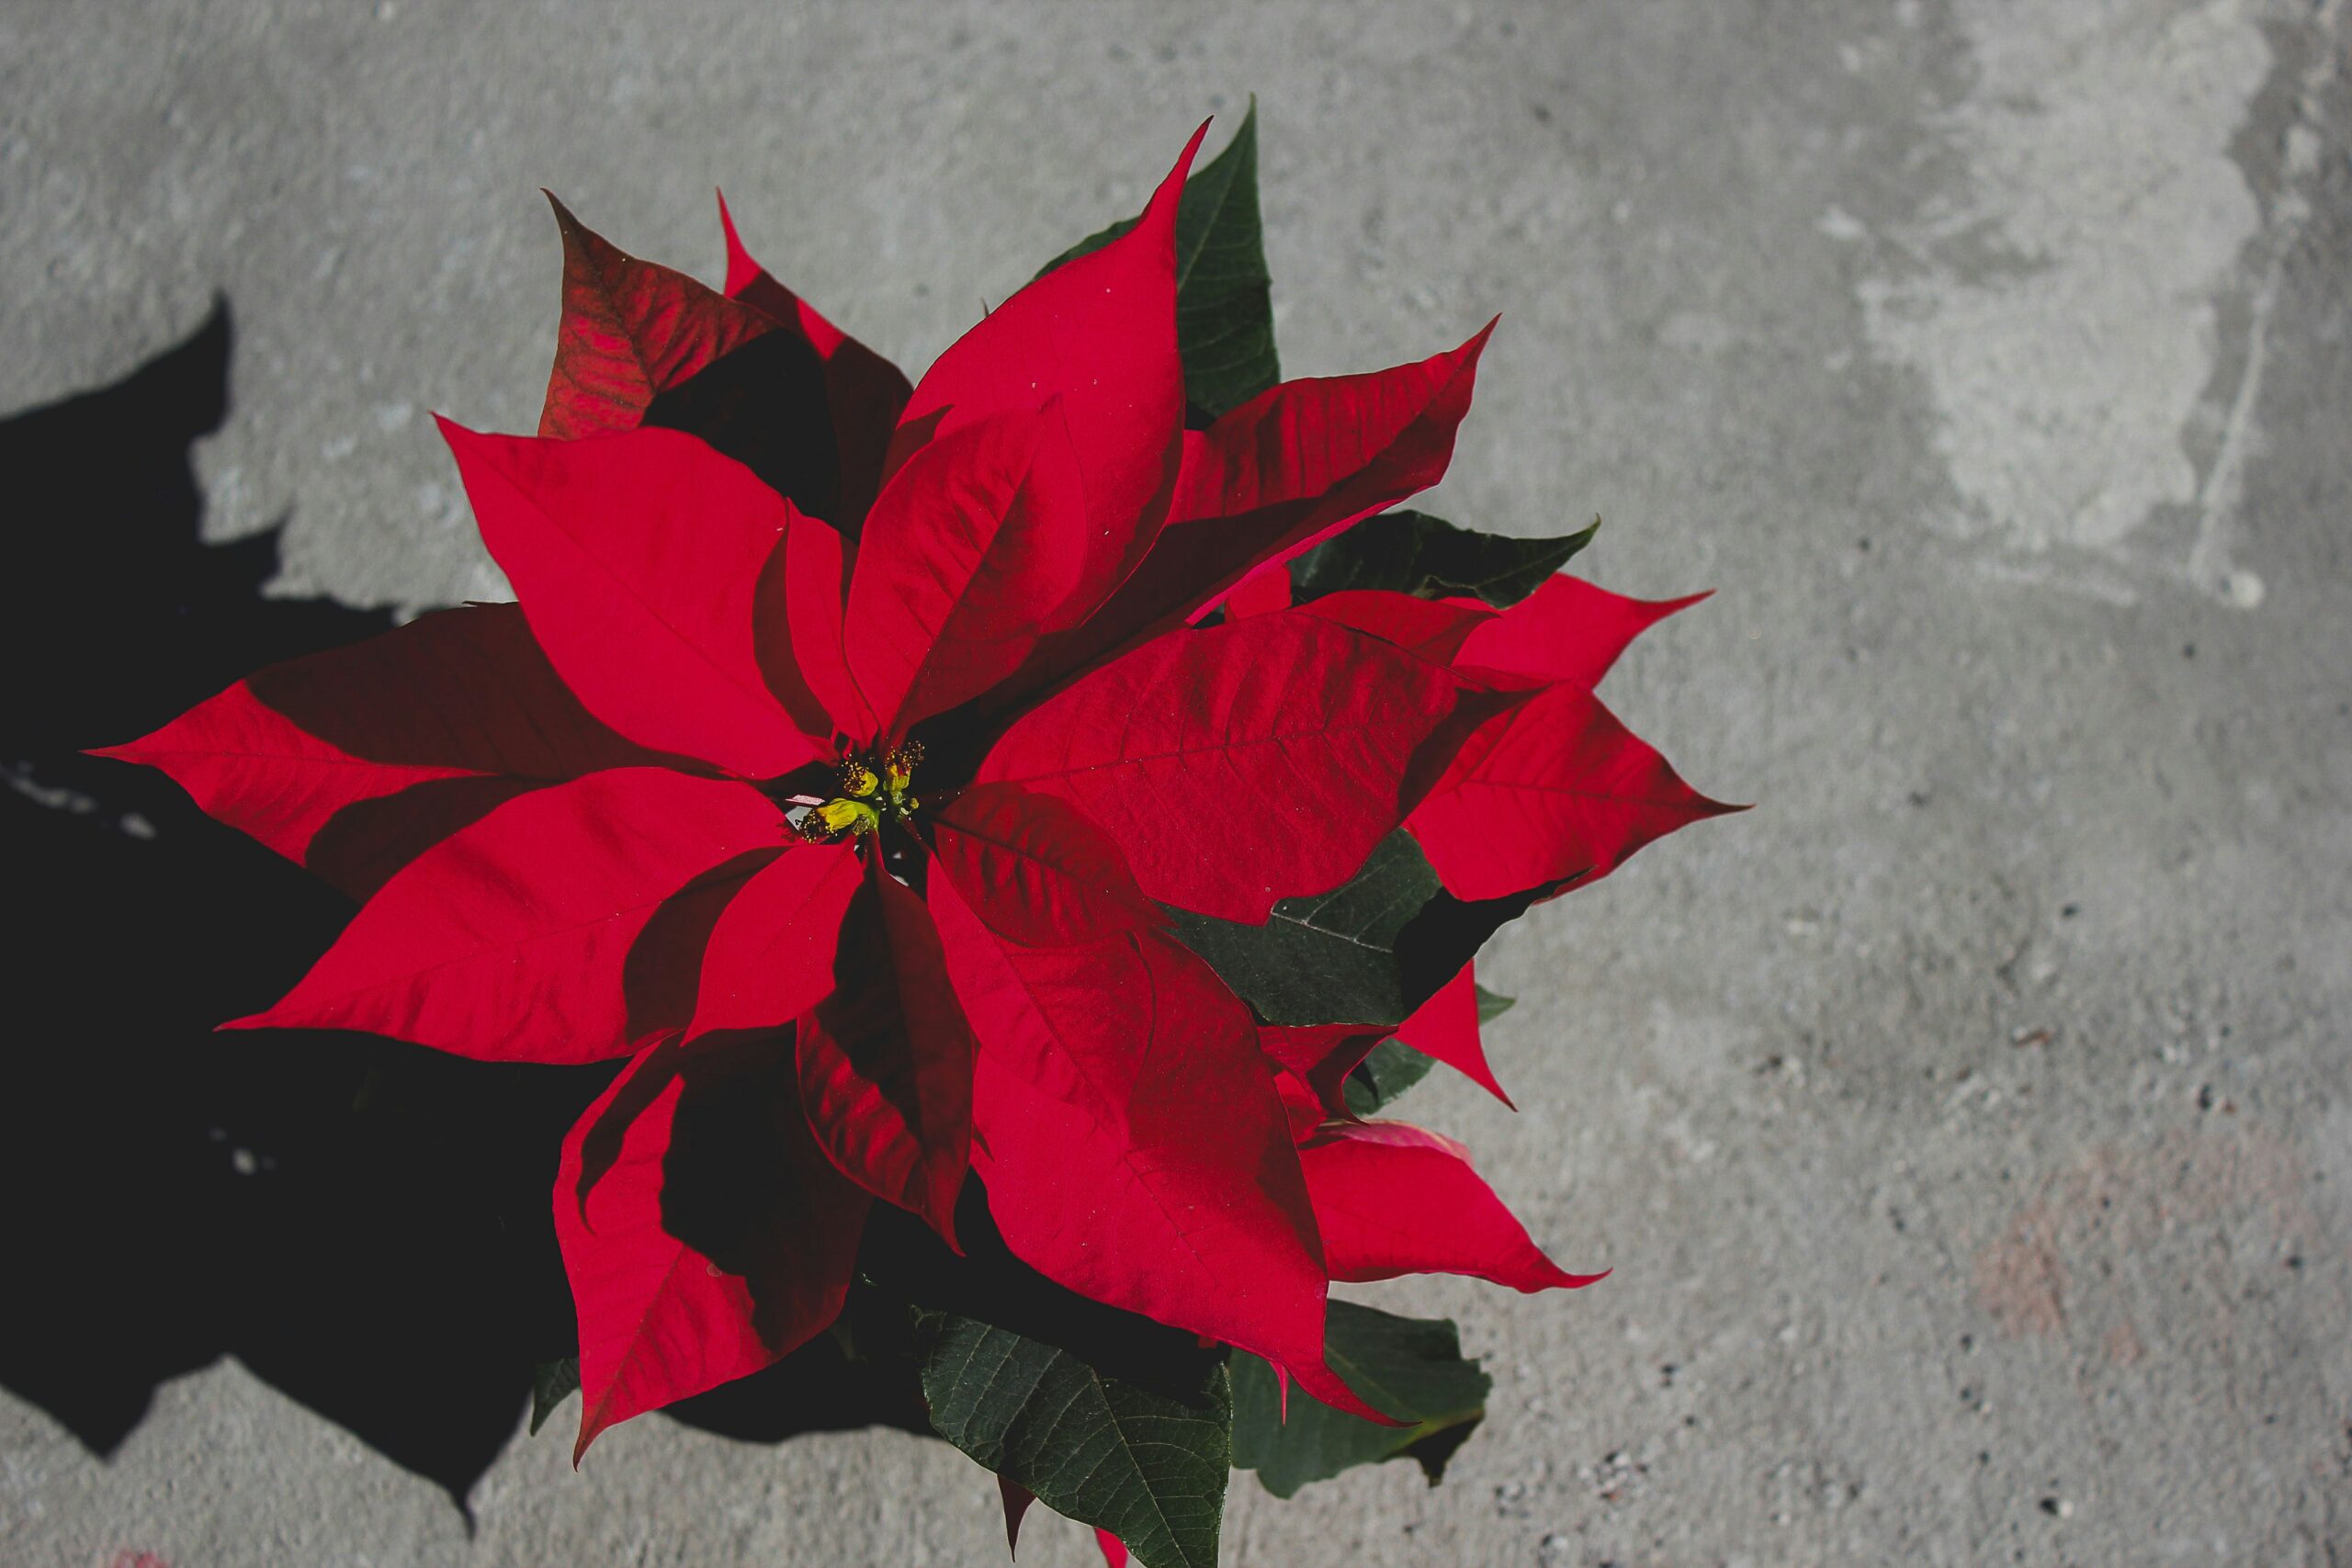 A red poinsettia, which is popularly known as the Christmas flower.